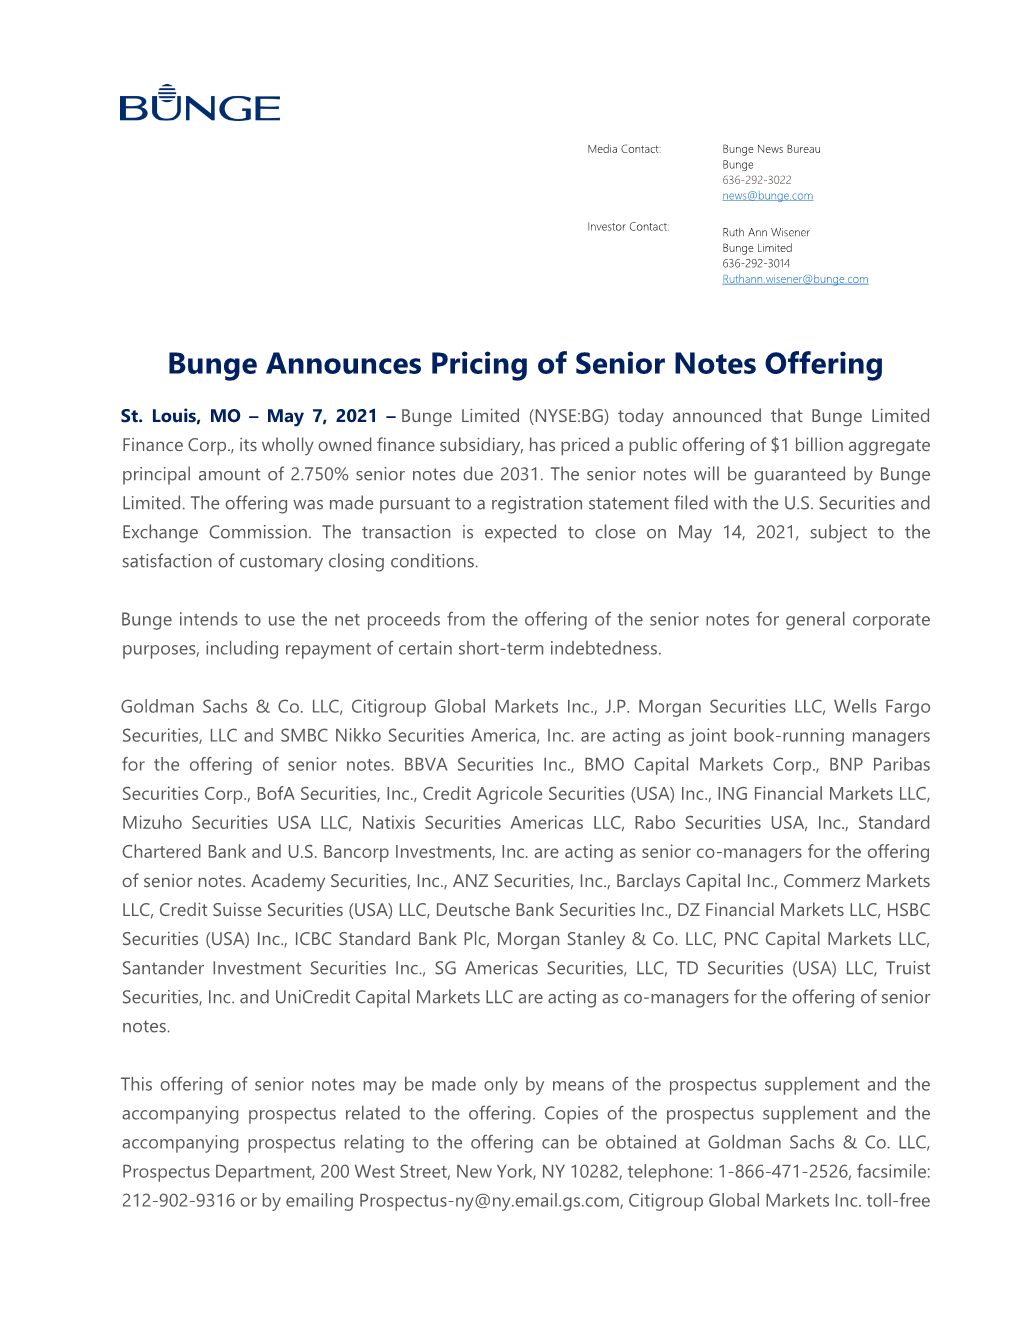 Bunge Announces Pricing of Senior Notes Offering